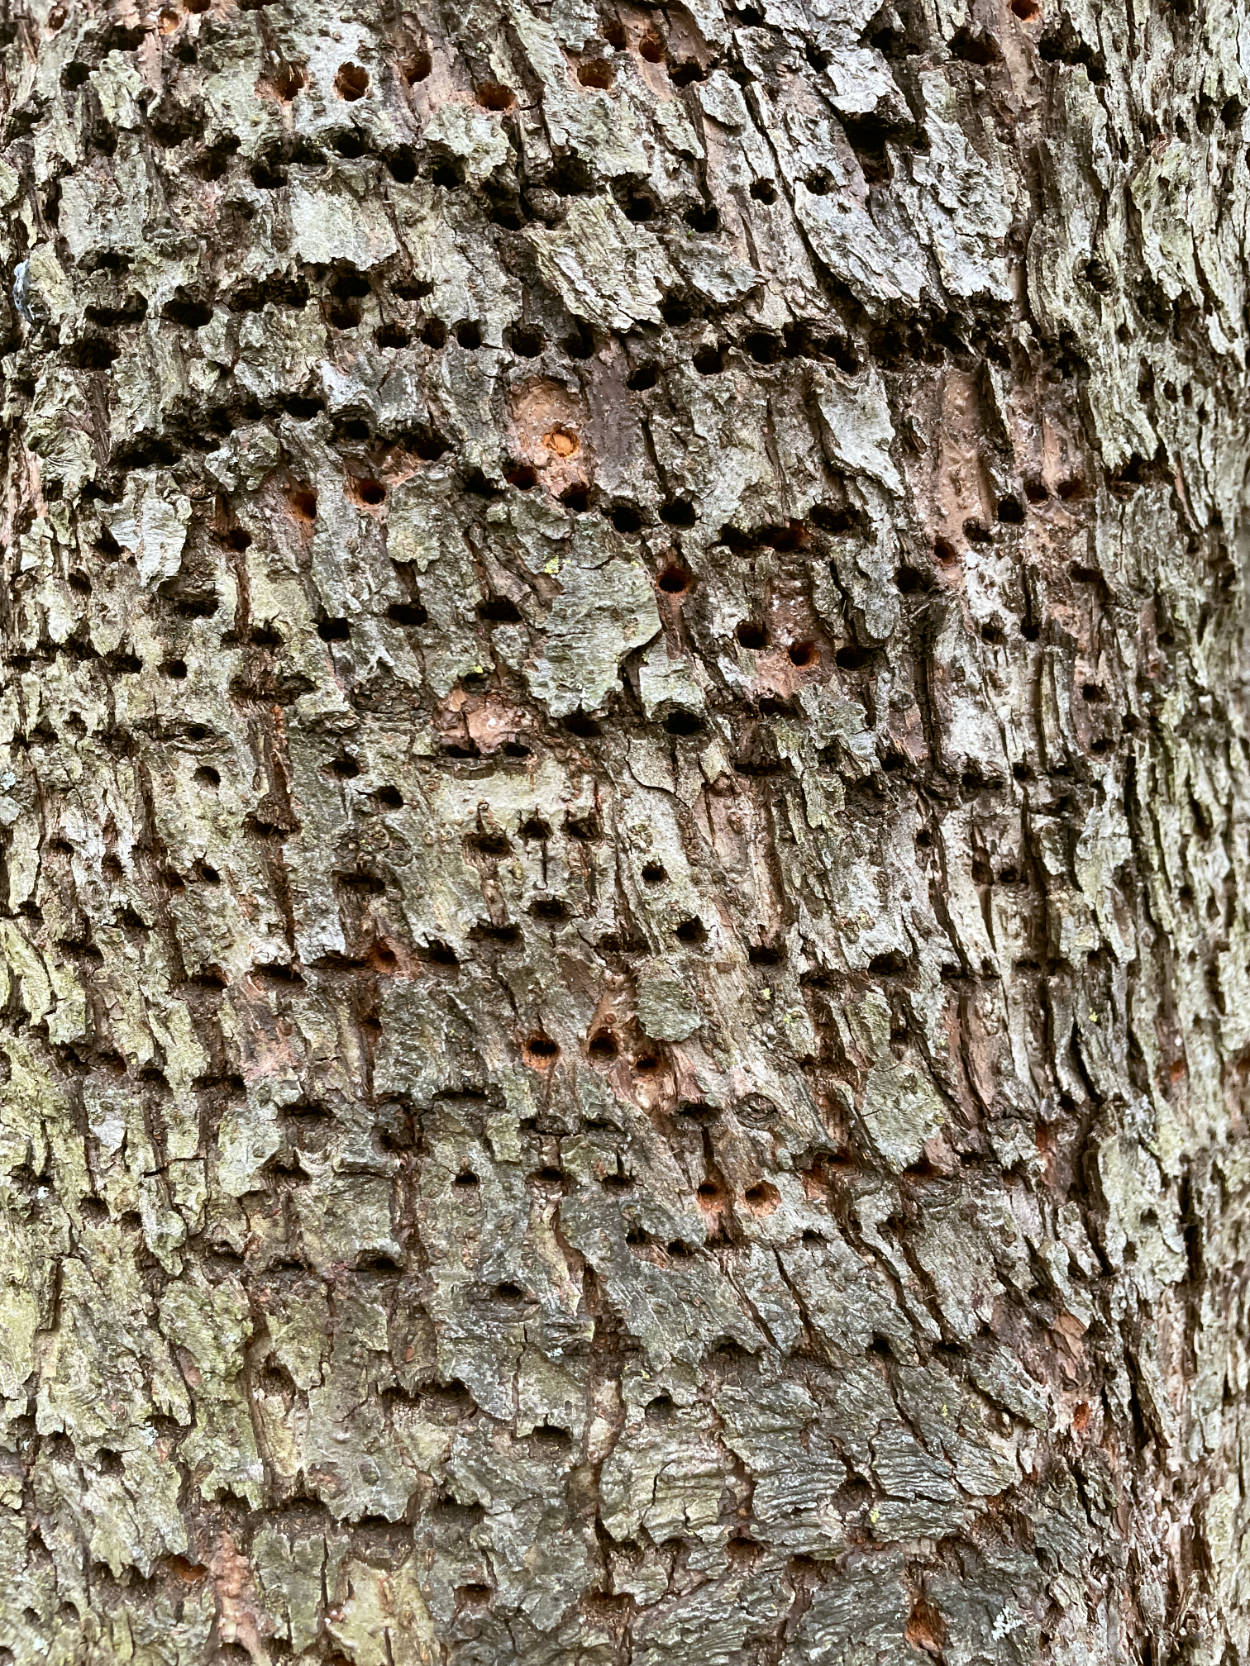 Close up photo of tree bark with rows of woodpecker holes